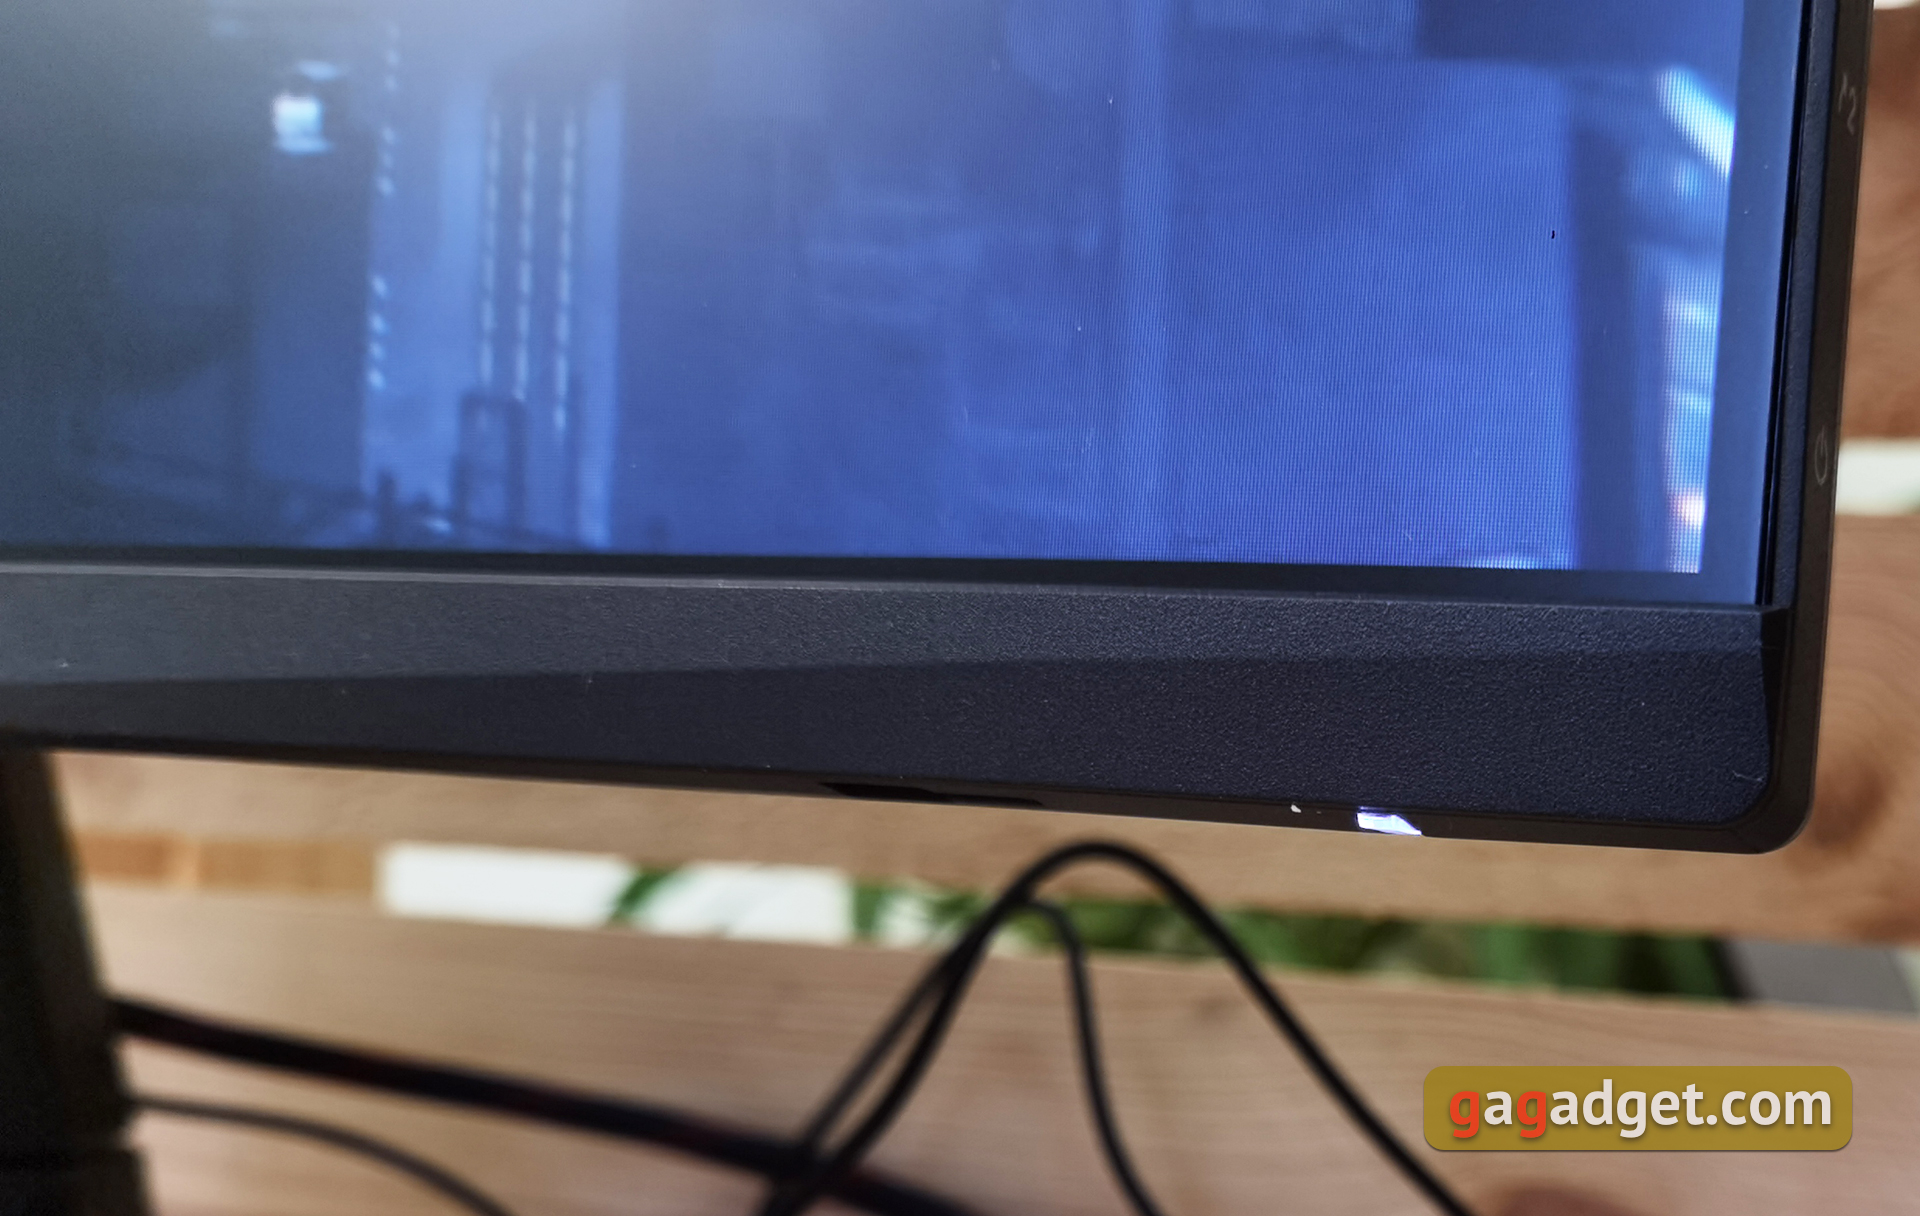 ASUS TUF Gaming VG279Q1A review: 27-inch gaming monitor with IPS panel and 165 Hz refresh rate-21